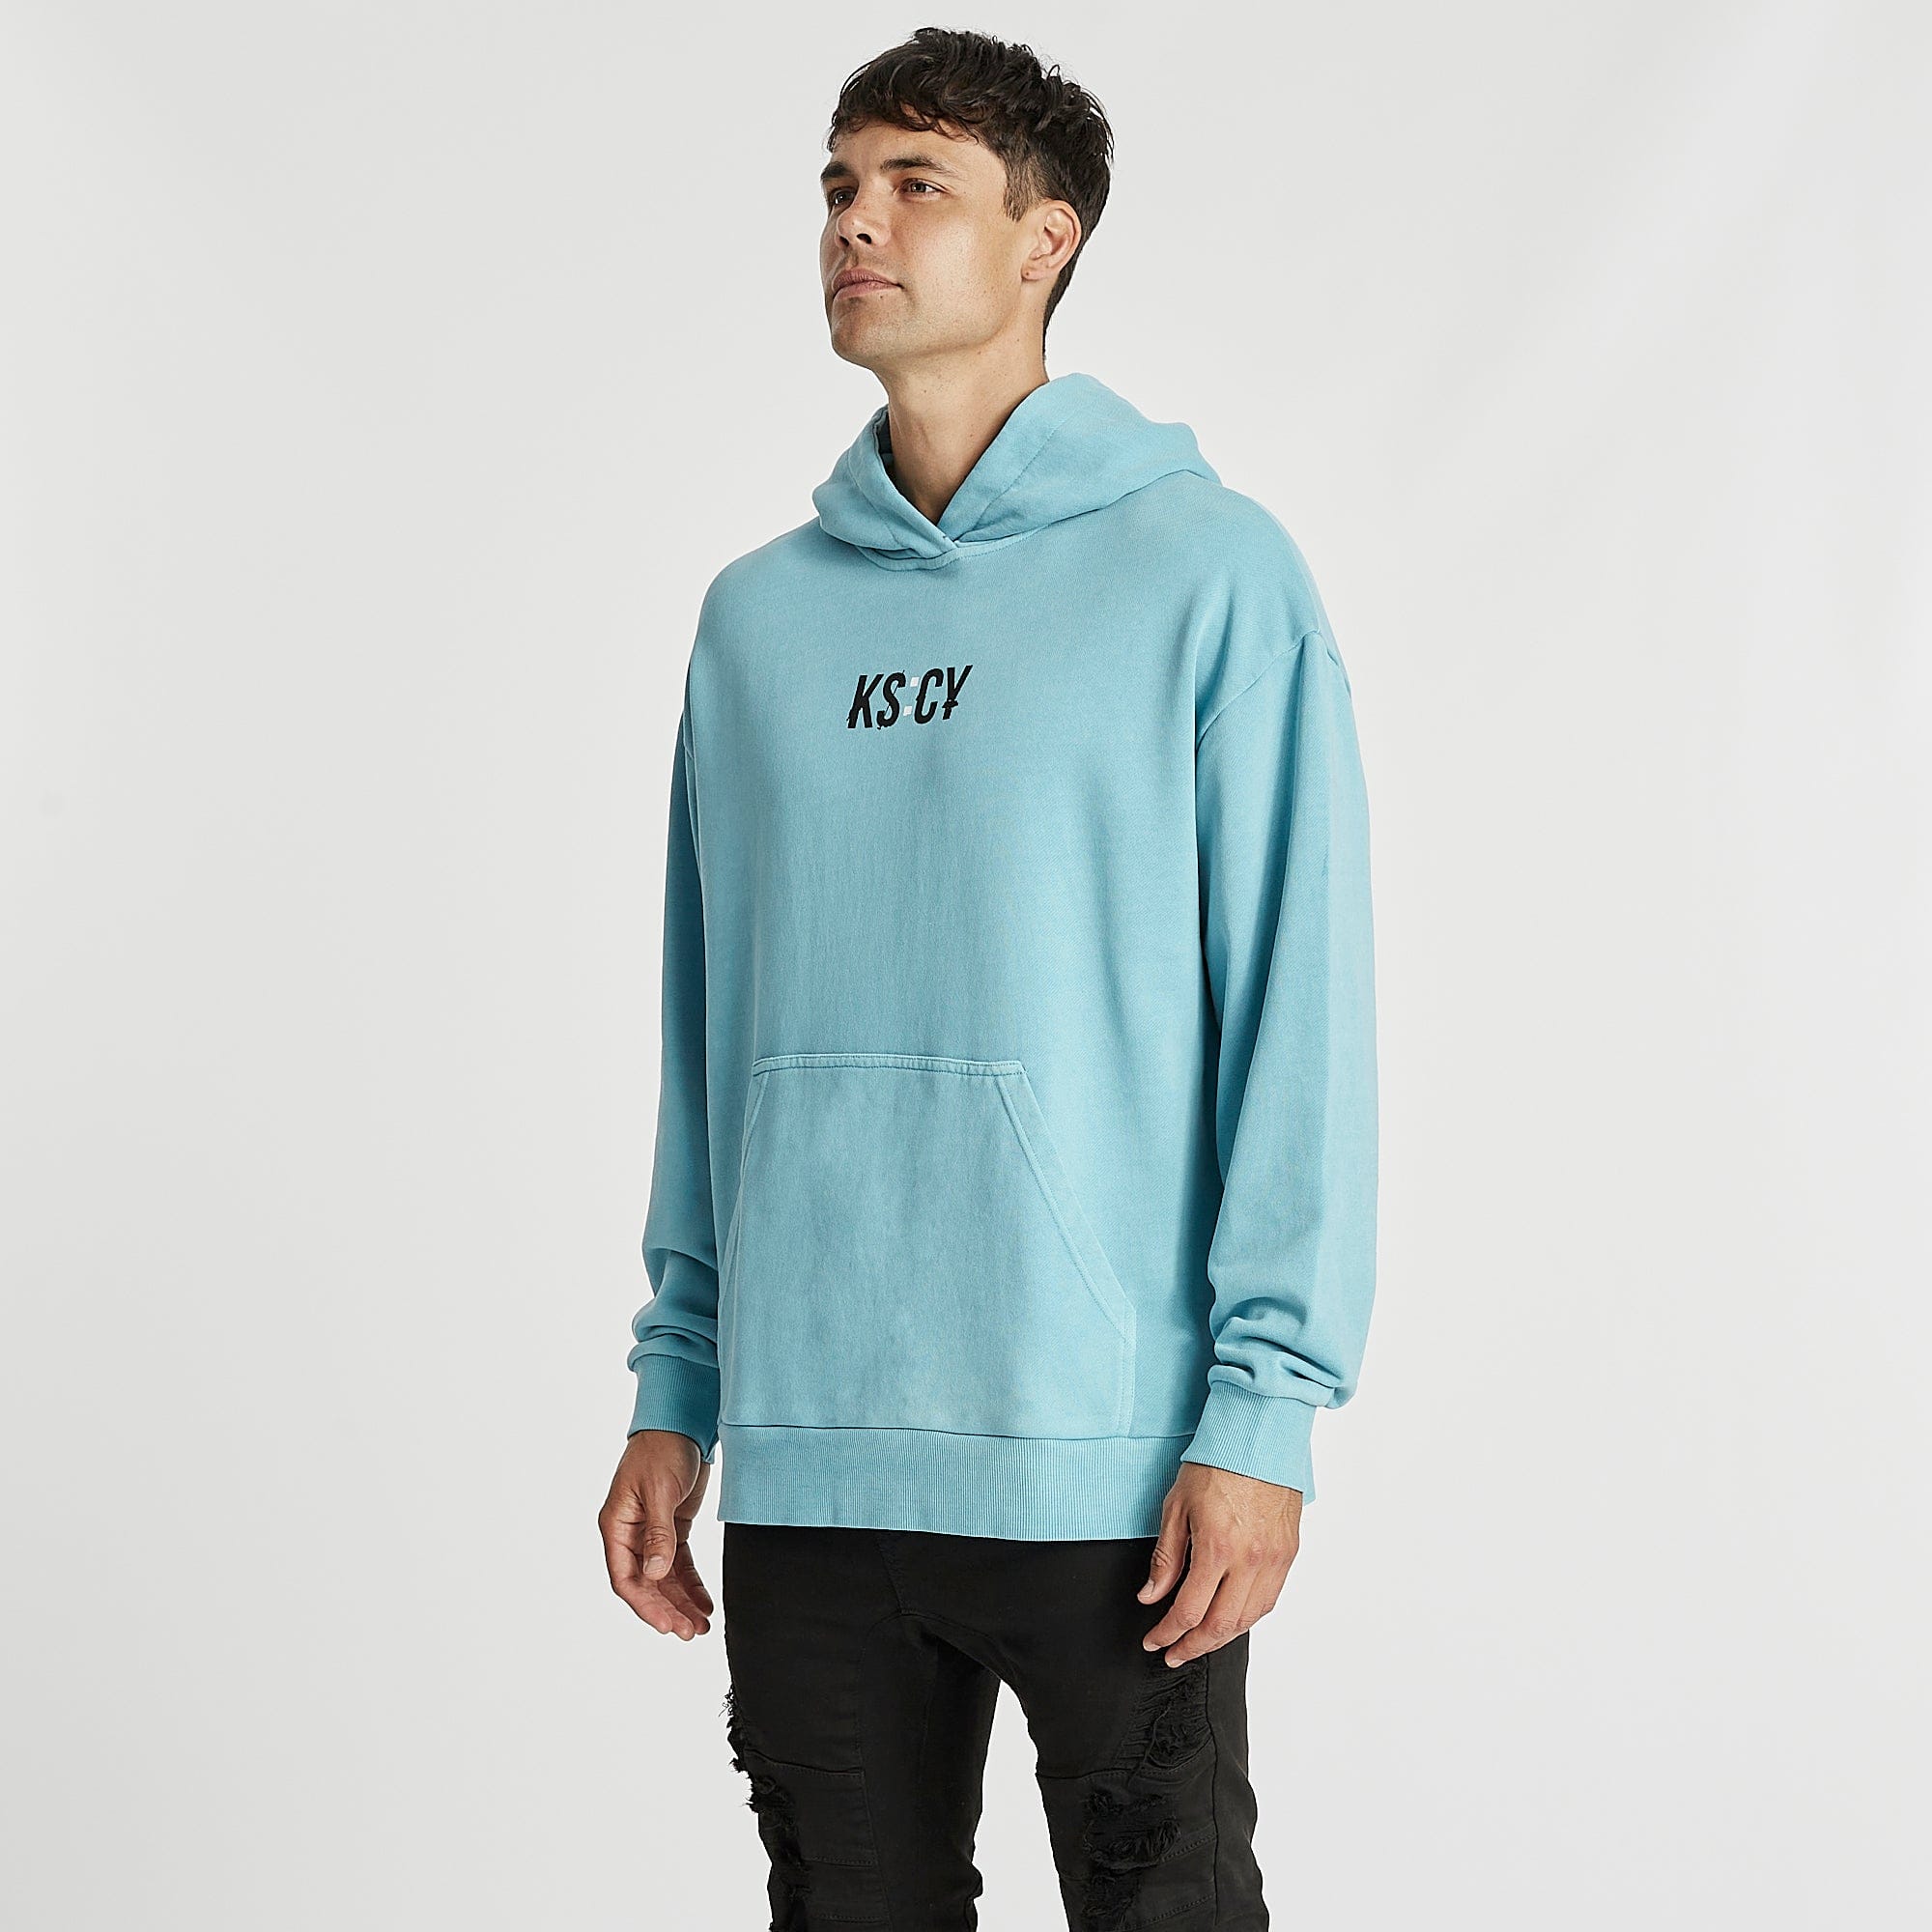 Fanatic Relaxed Hoodie Pigment Reef